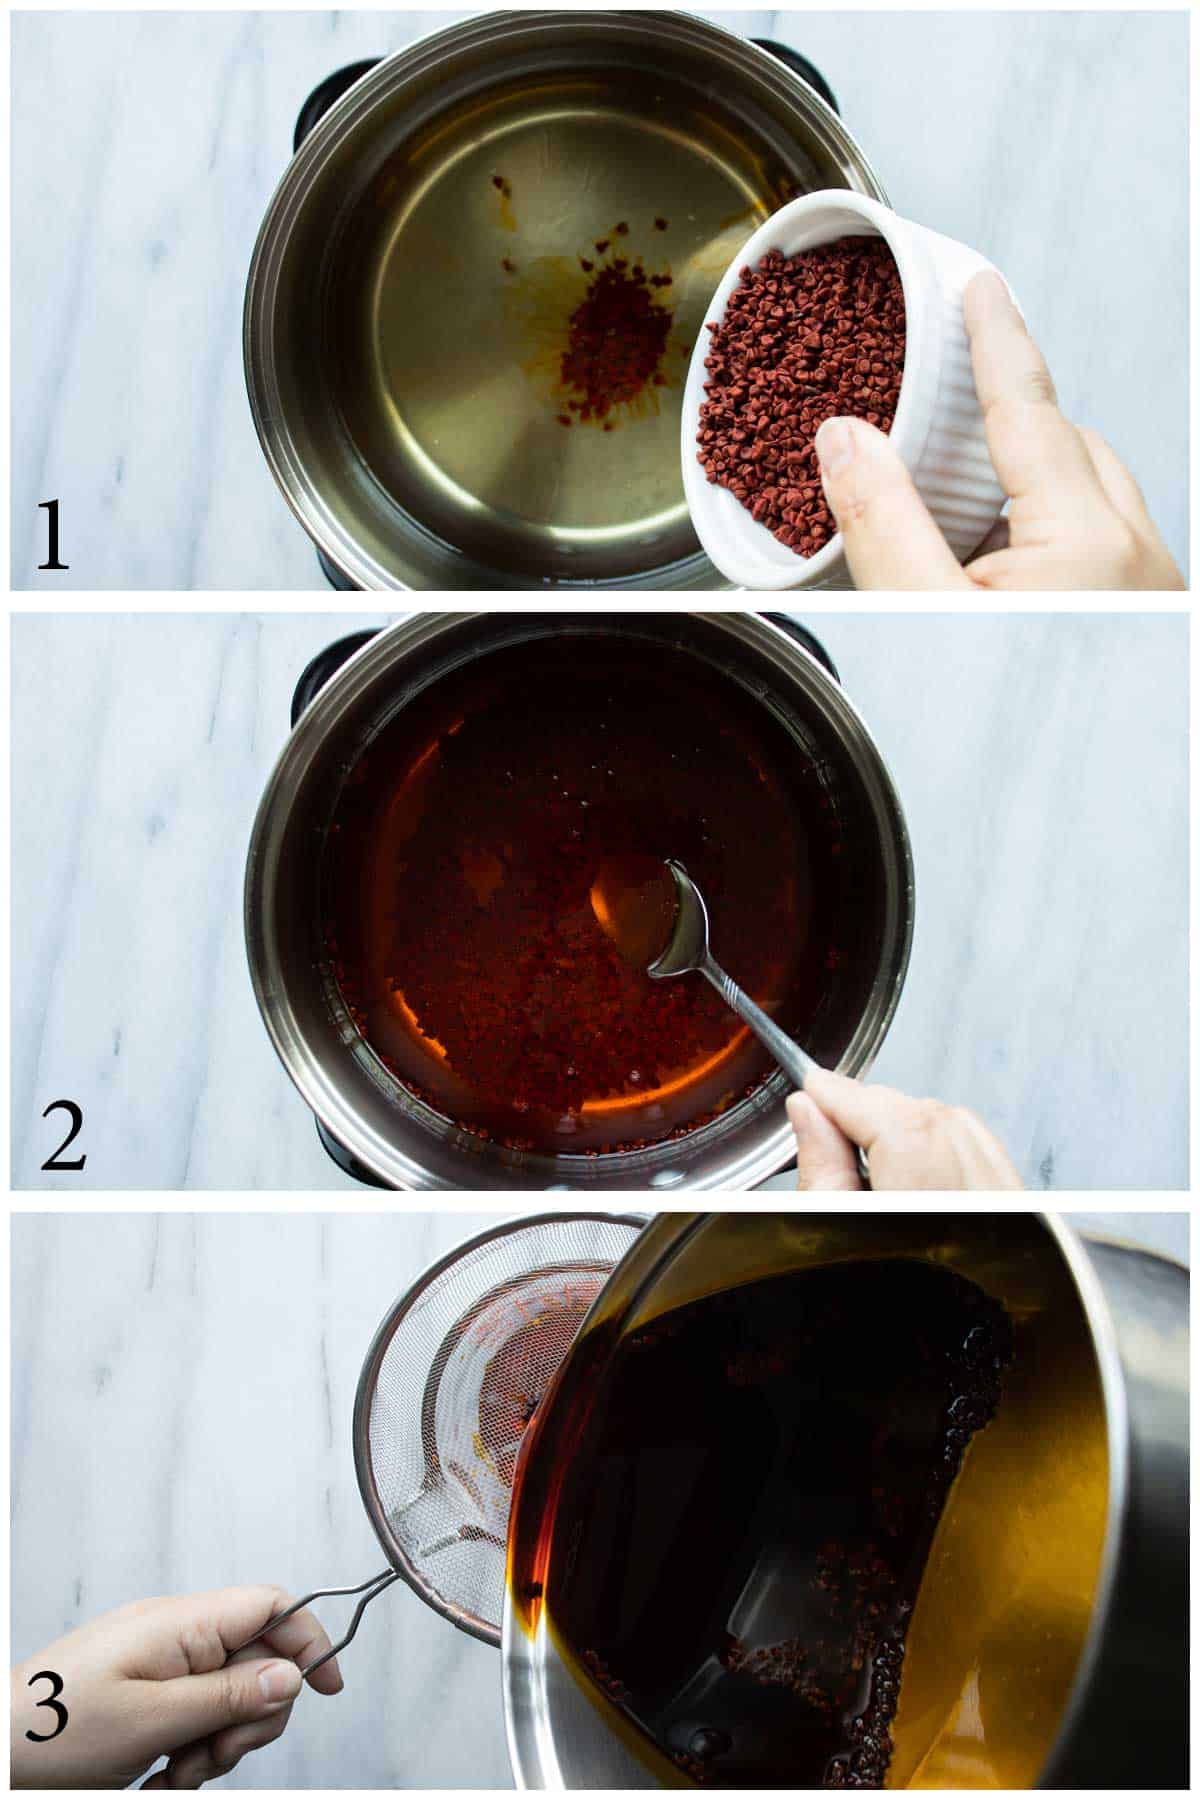 images for steps 1-3 to make achiote oil.